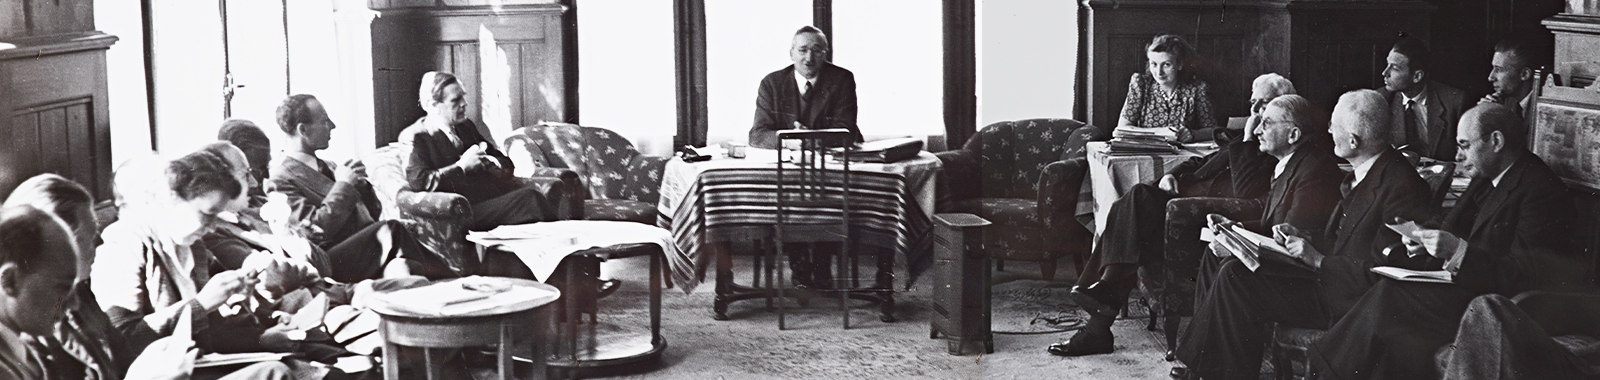 detail of a photograph of a photo album page showing the first meeting of the Mont Pelerin Society, with Hayek seated at center